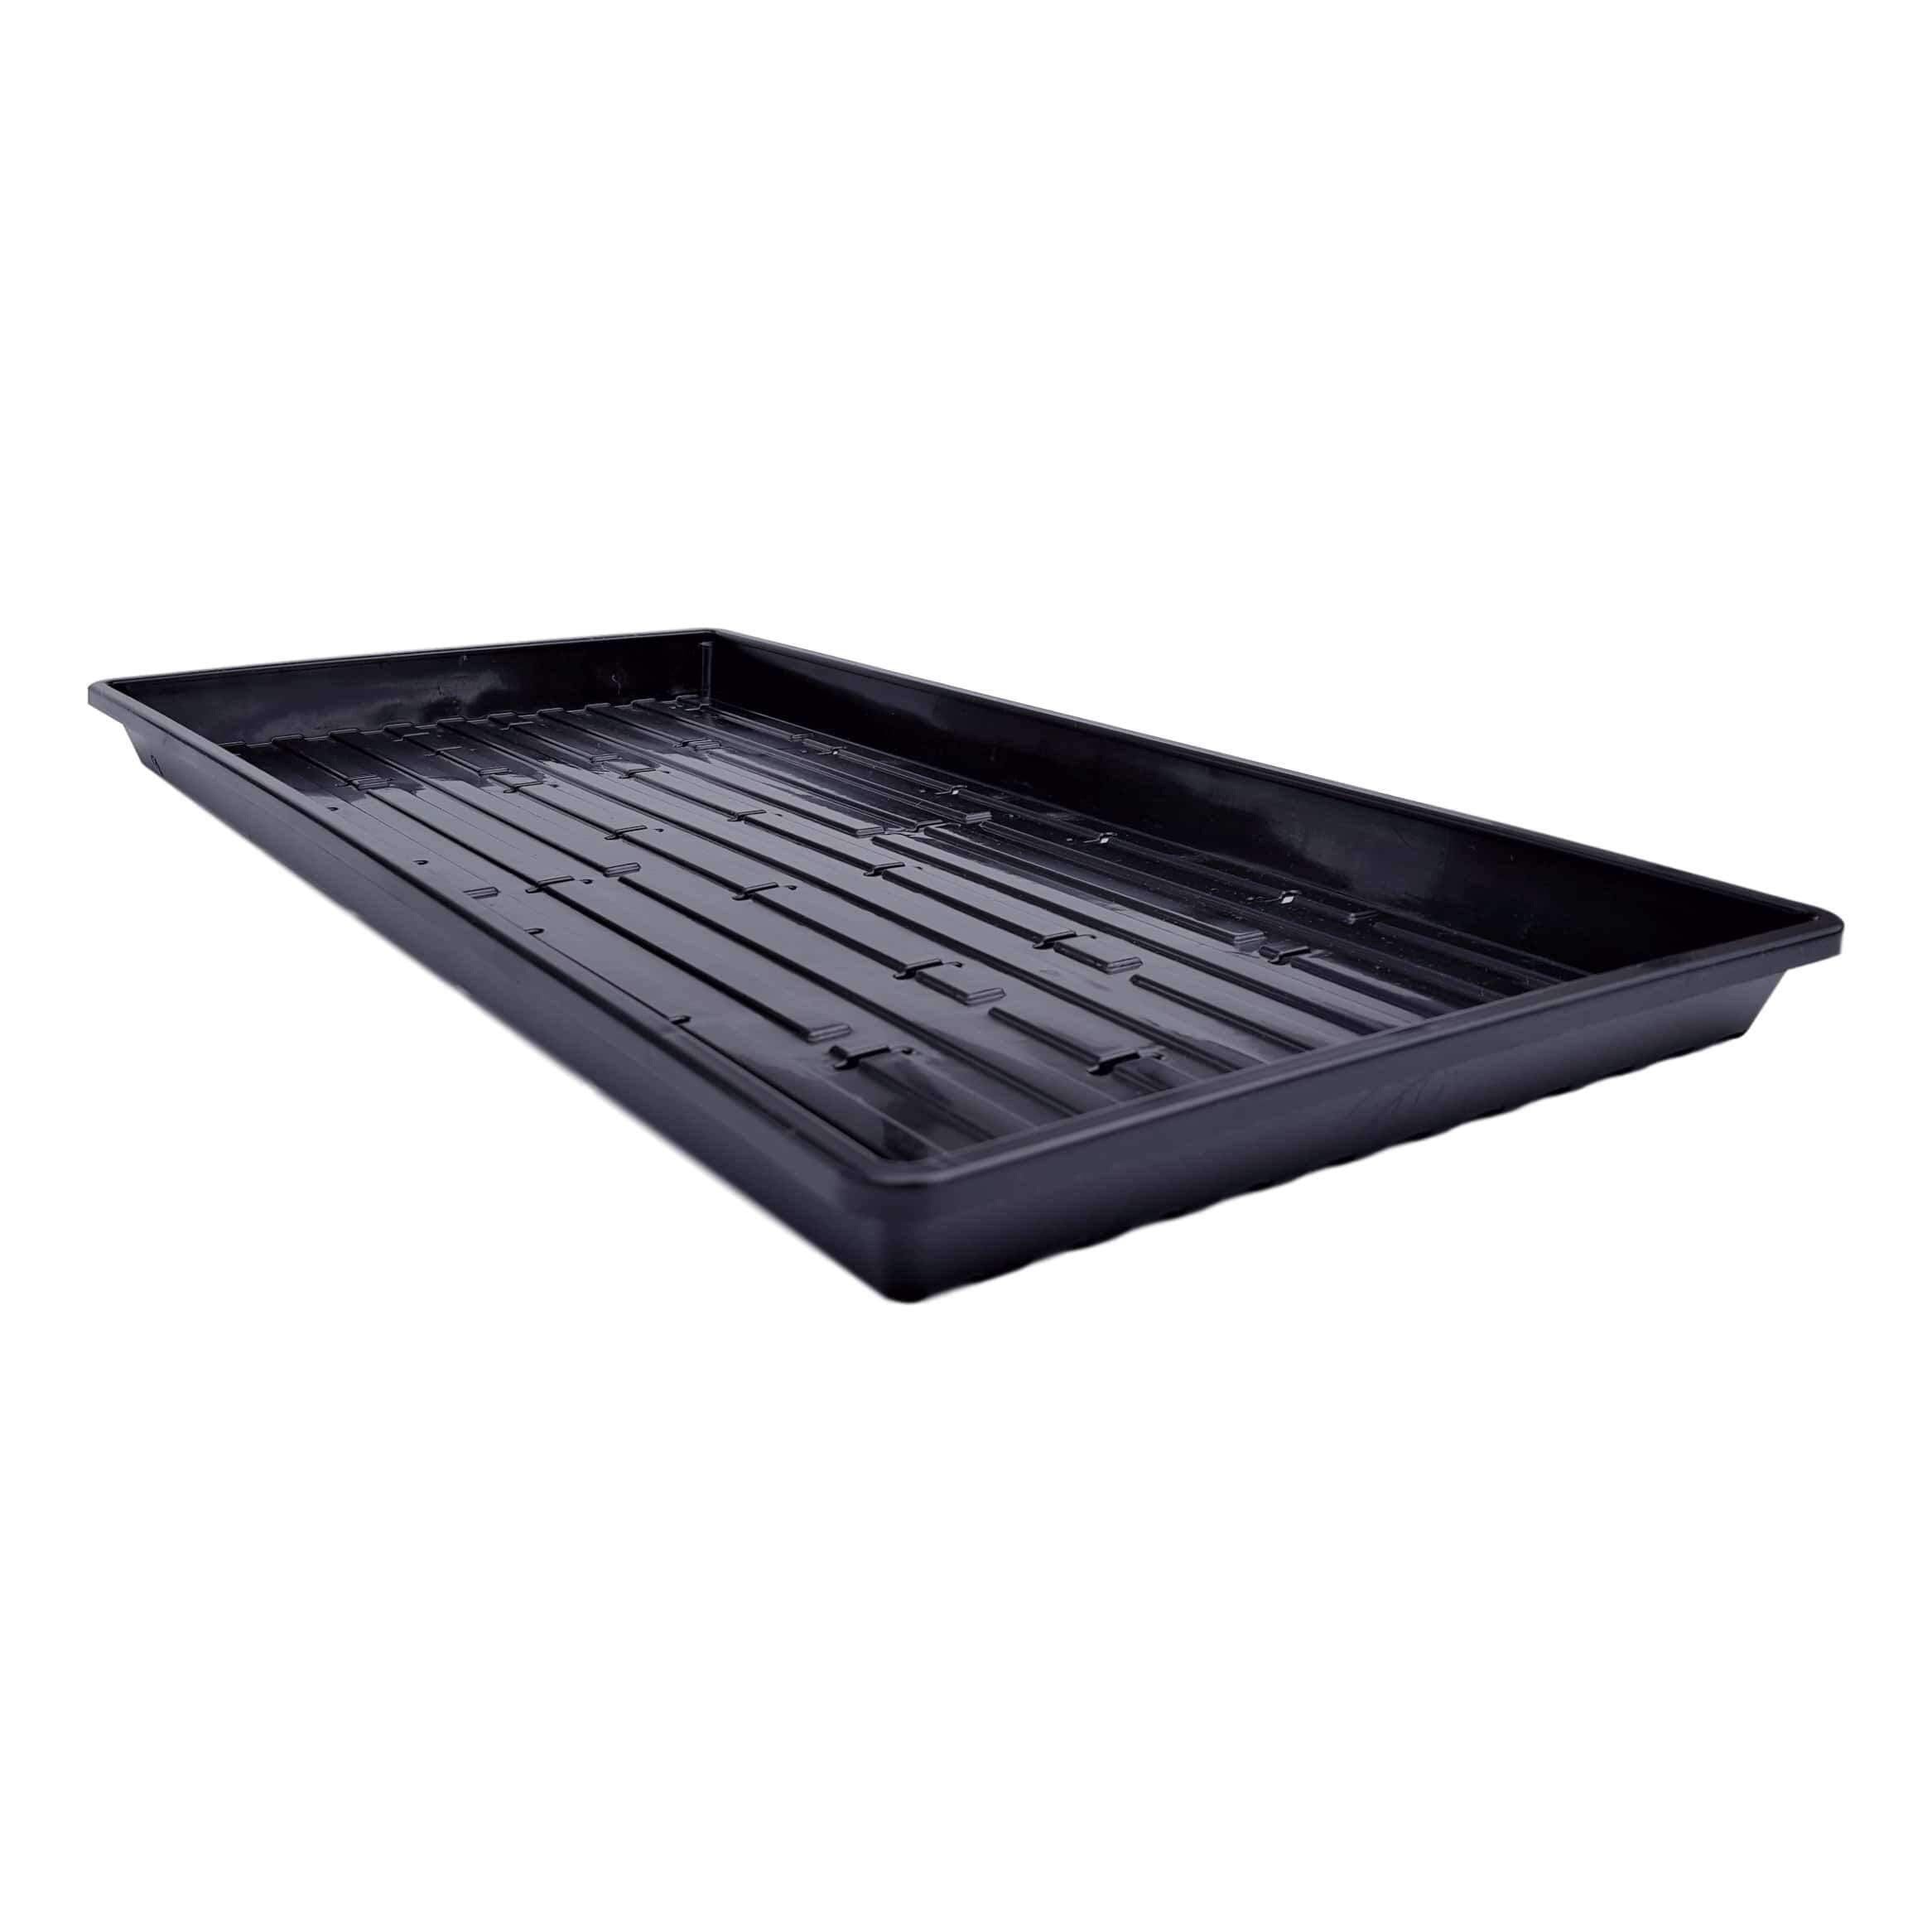 Shallow Extra Strength 1020  Trays - For use under Plug Trays or for Microgreens